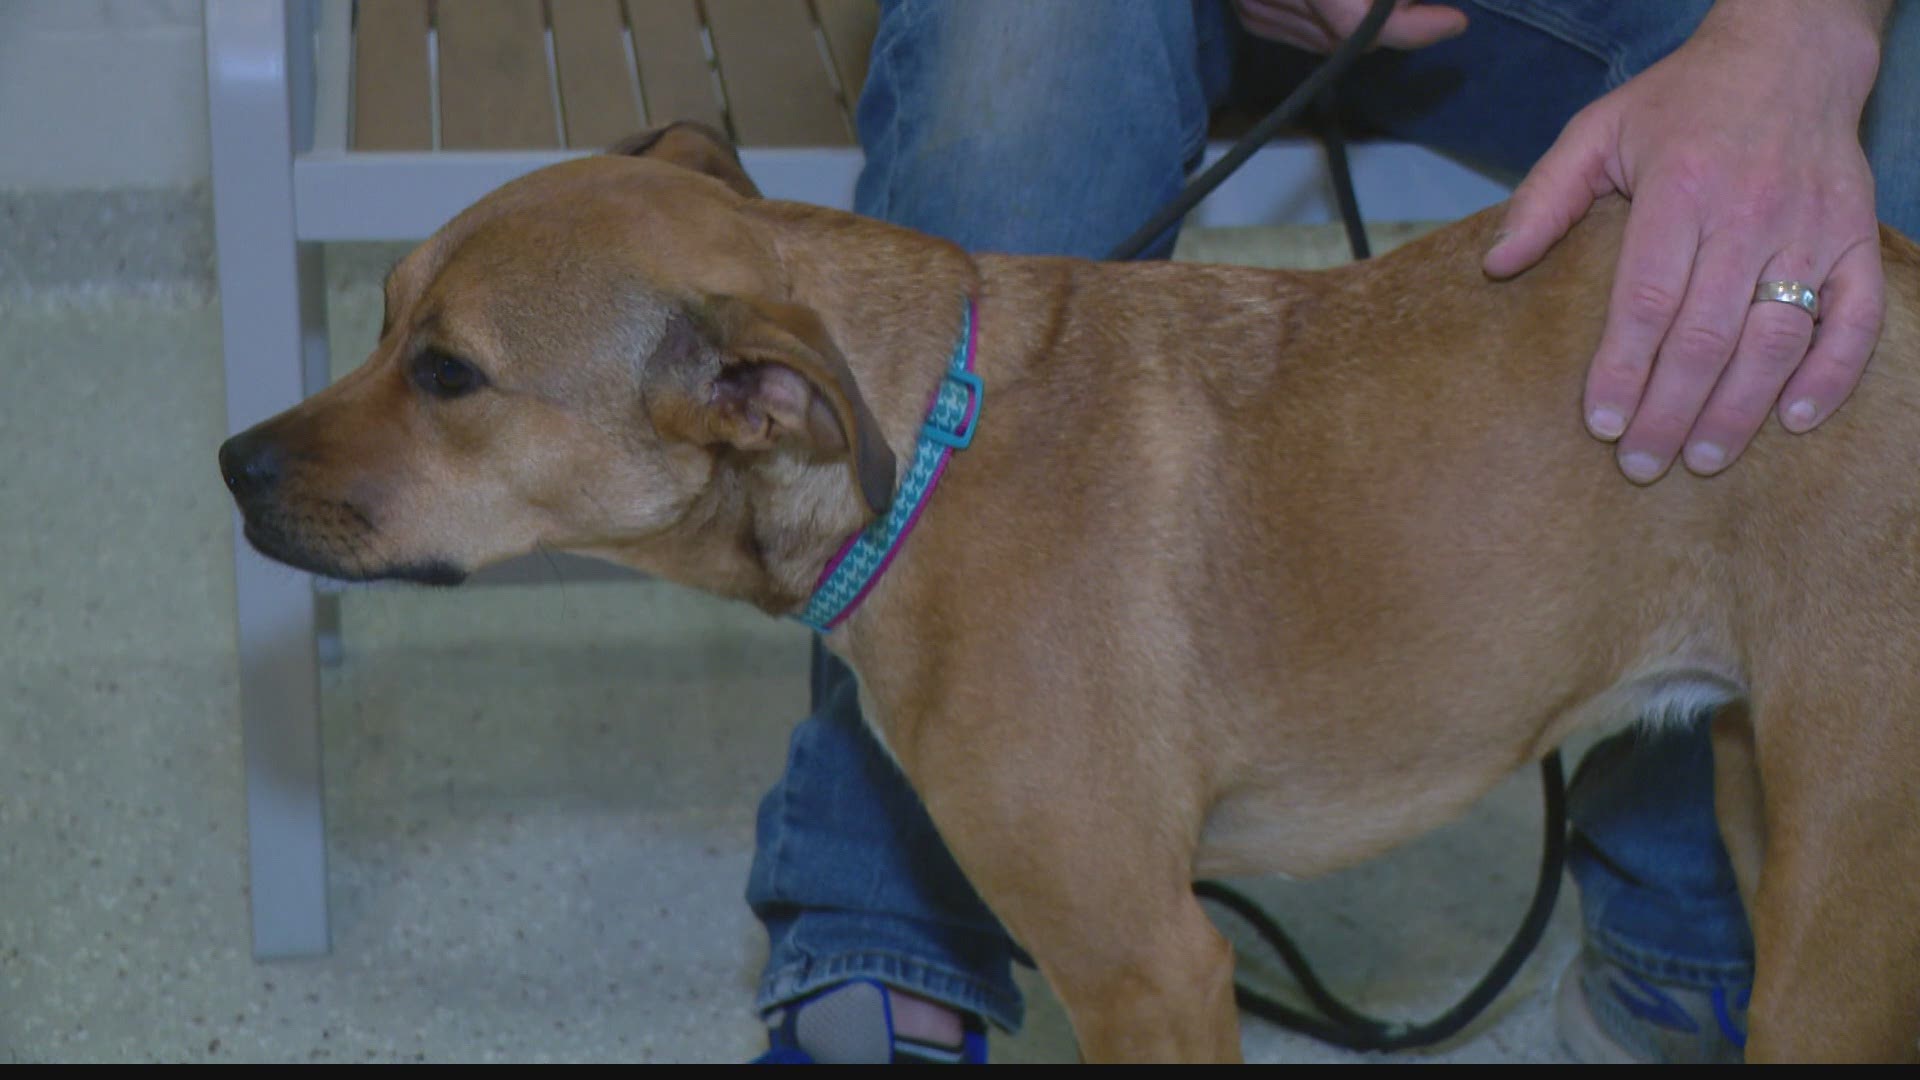 IndyHumane raises thousands of dollars to get special surgery for dog |  